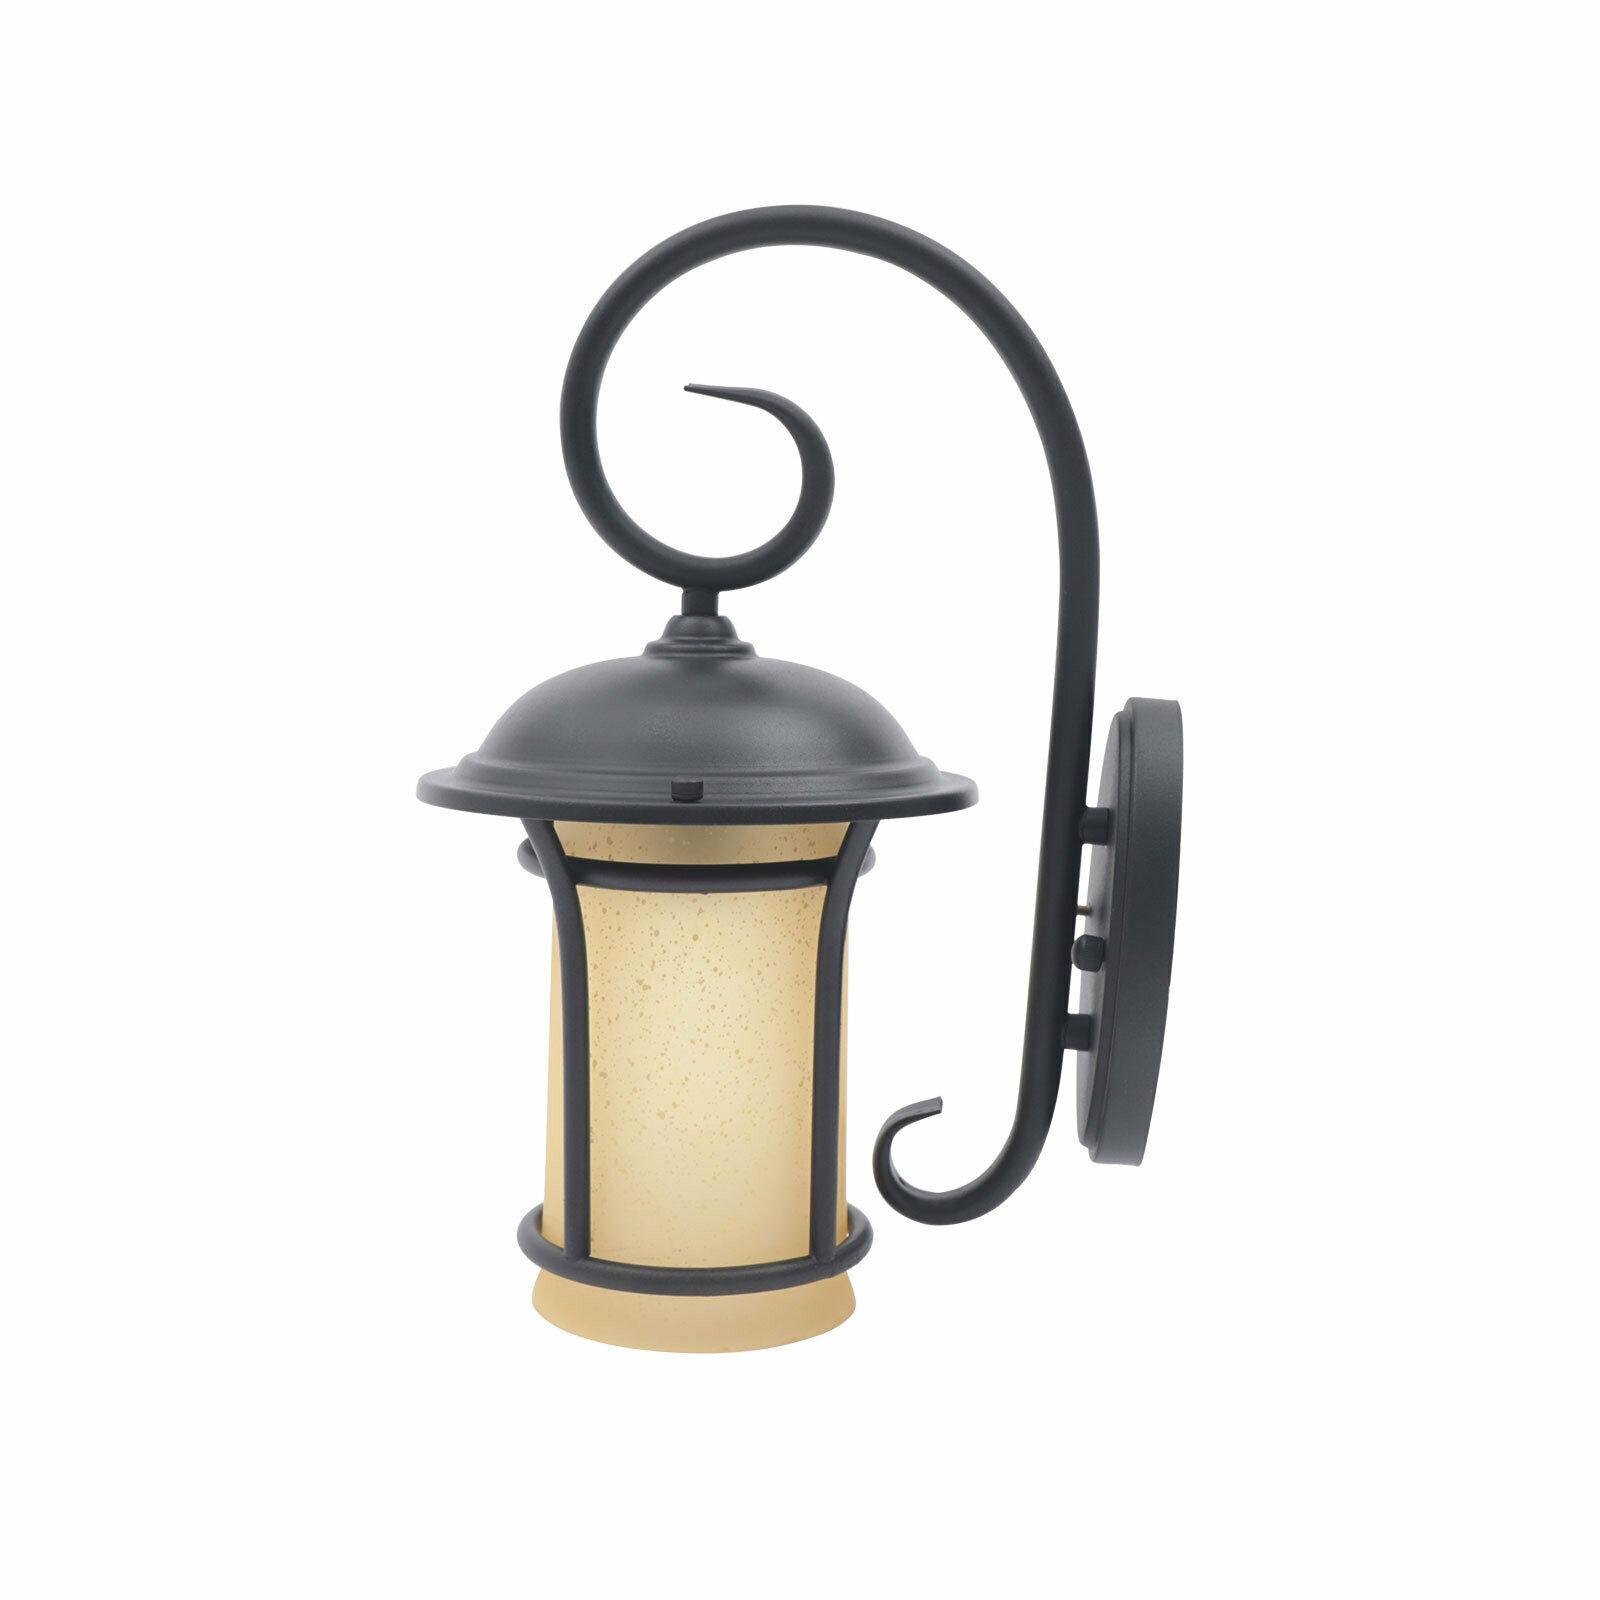 Exterior Wall Light Fixture Sconce Vintage Outdoor Retro Ground Glass Porch Lamp Outdoor Wall Light Exterior Wall Lantern Waterproof Sconce Porch Black Finshing Entryways Lighting Wall Mounted Lamp - image 3 of 10